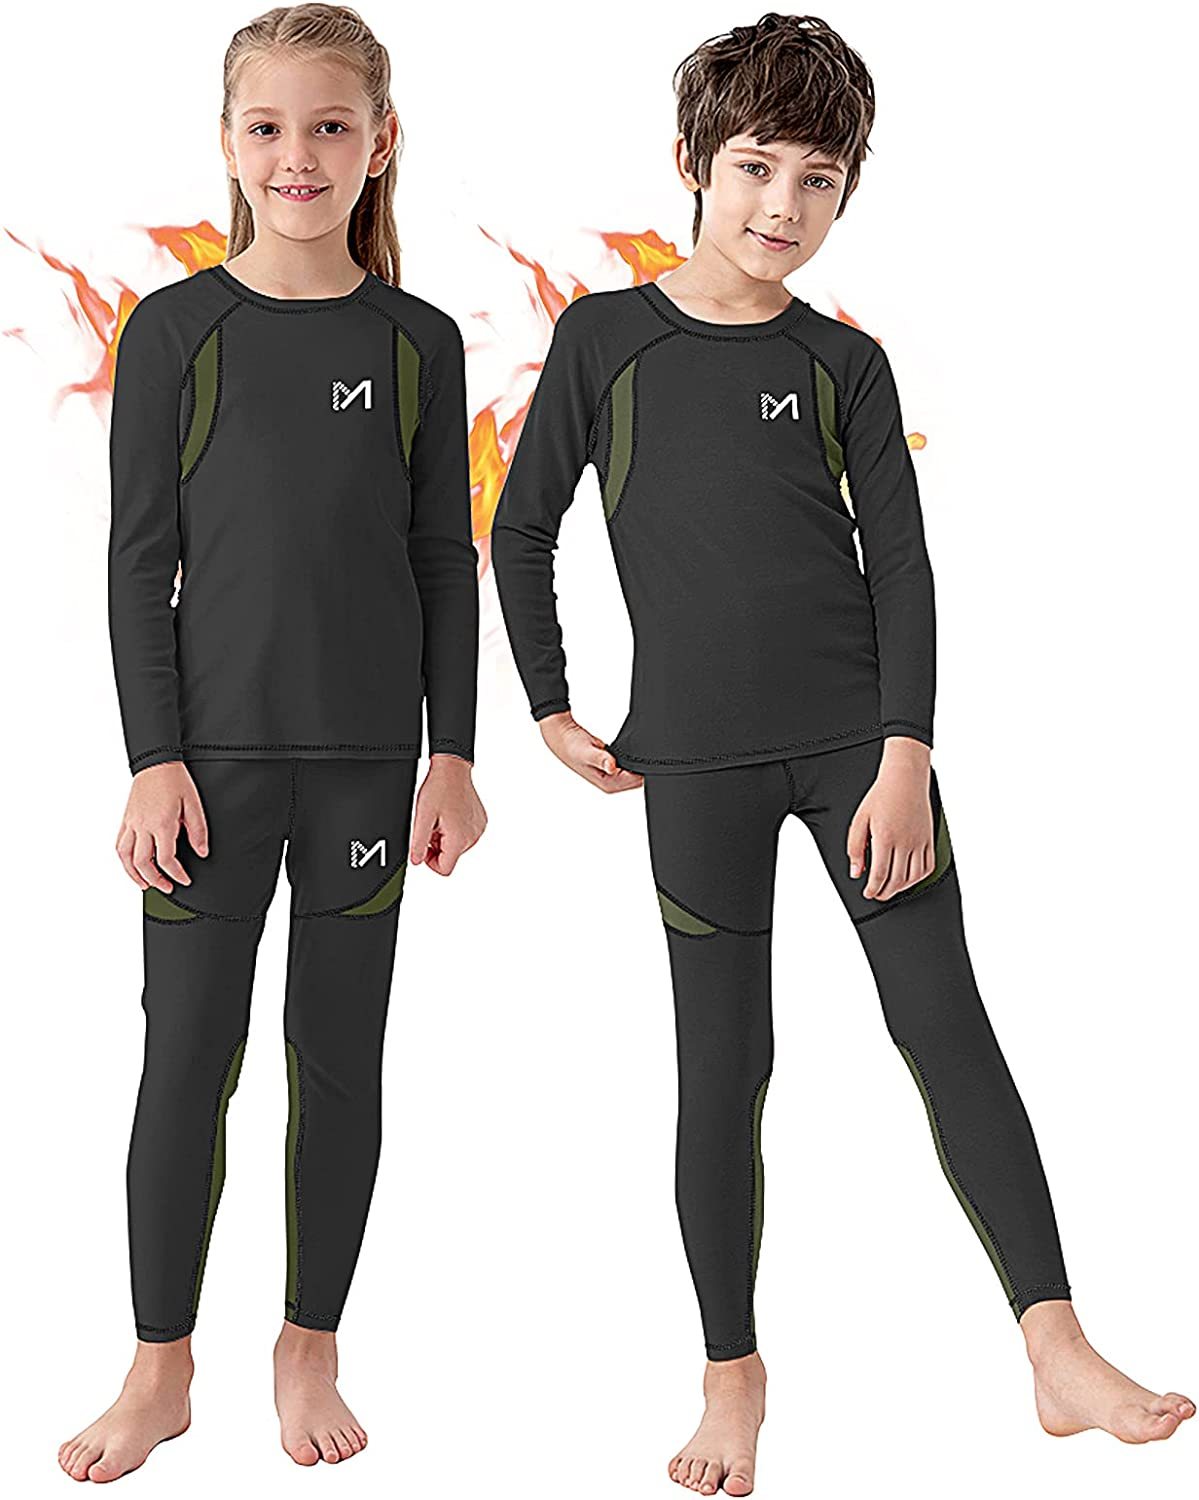 Kids Thermal Underwear / Childrens Base Layers & Long Johns For Sale -  Cheap Snow Gear